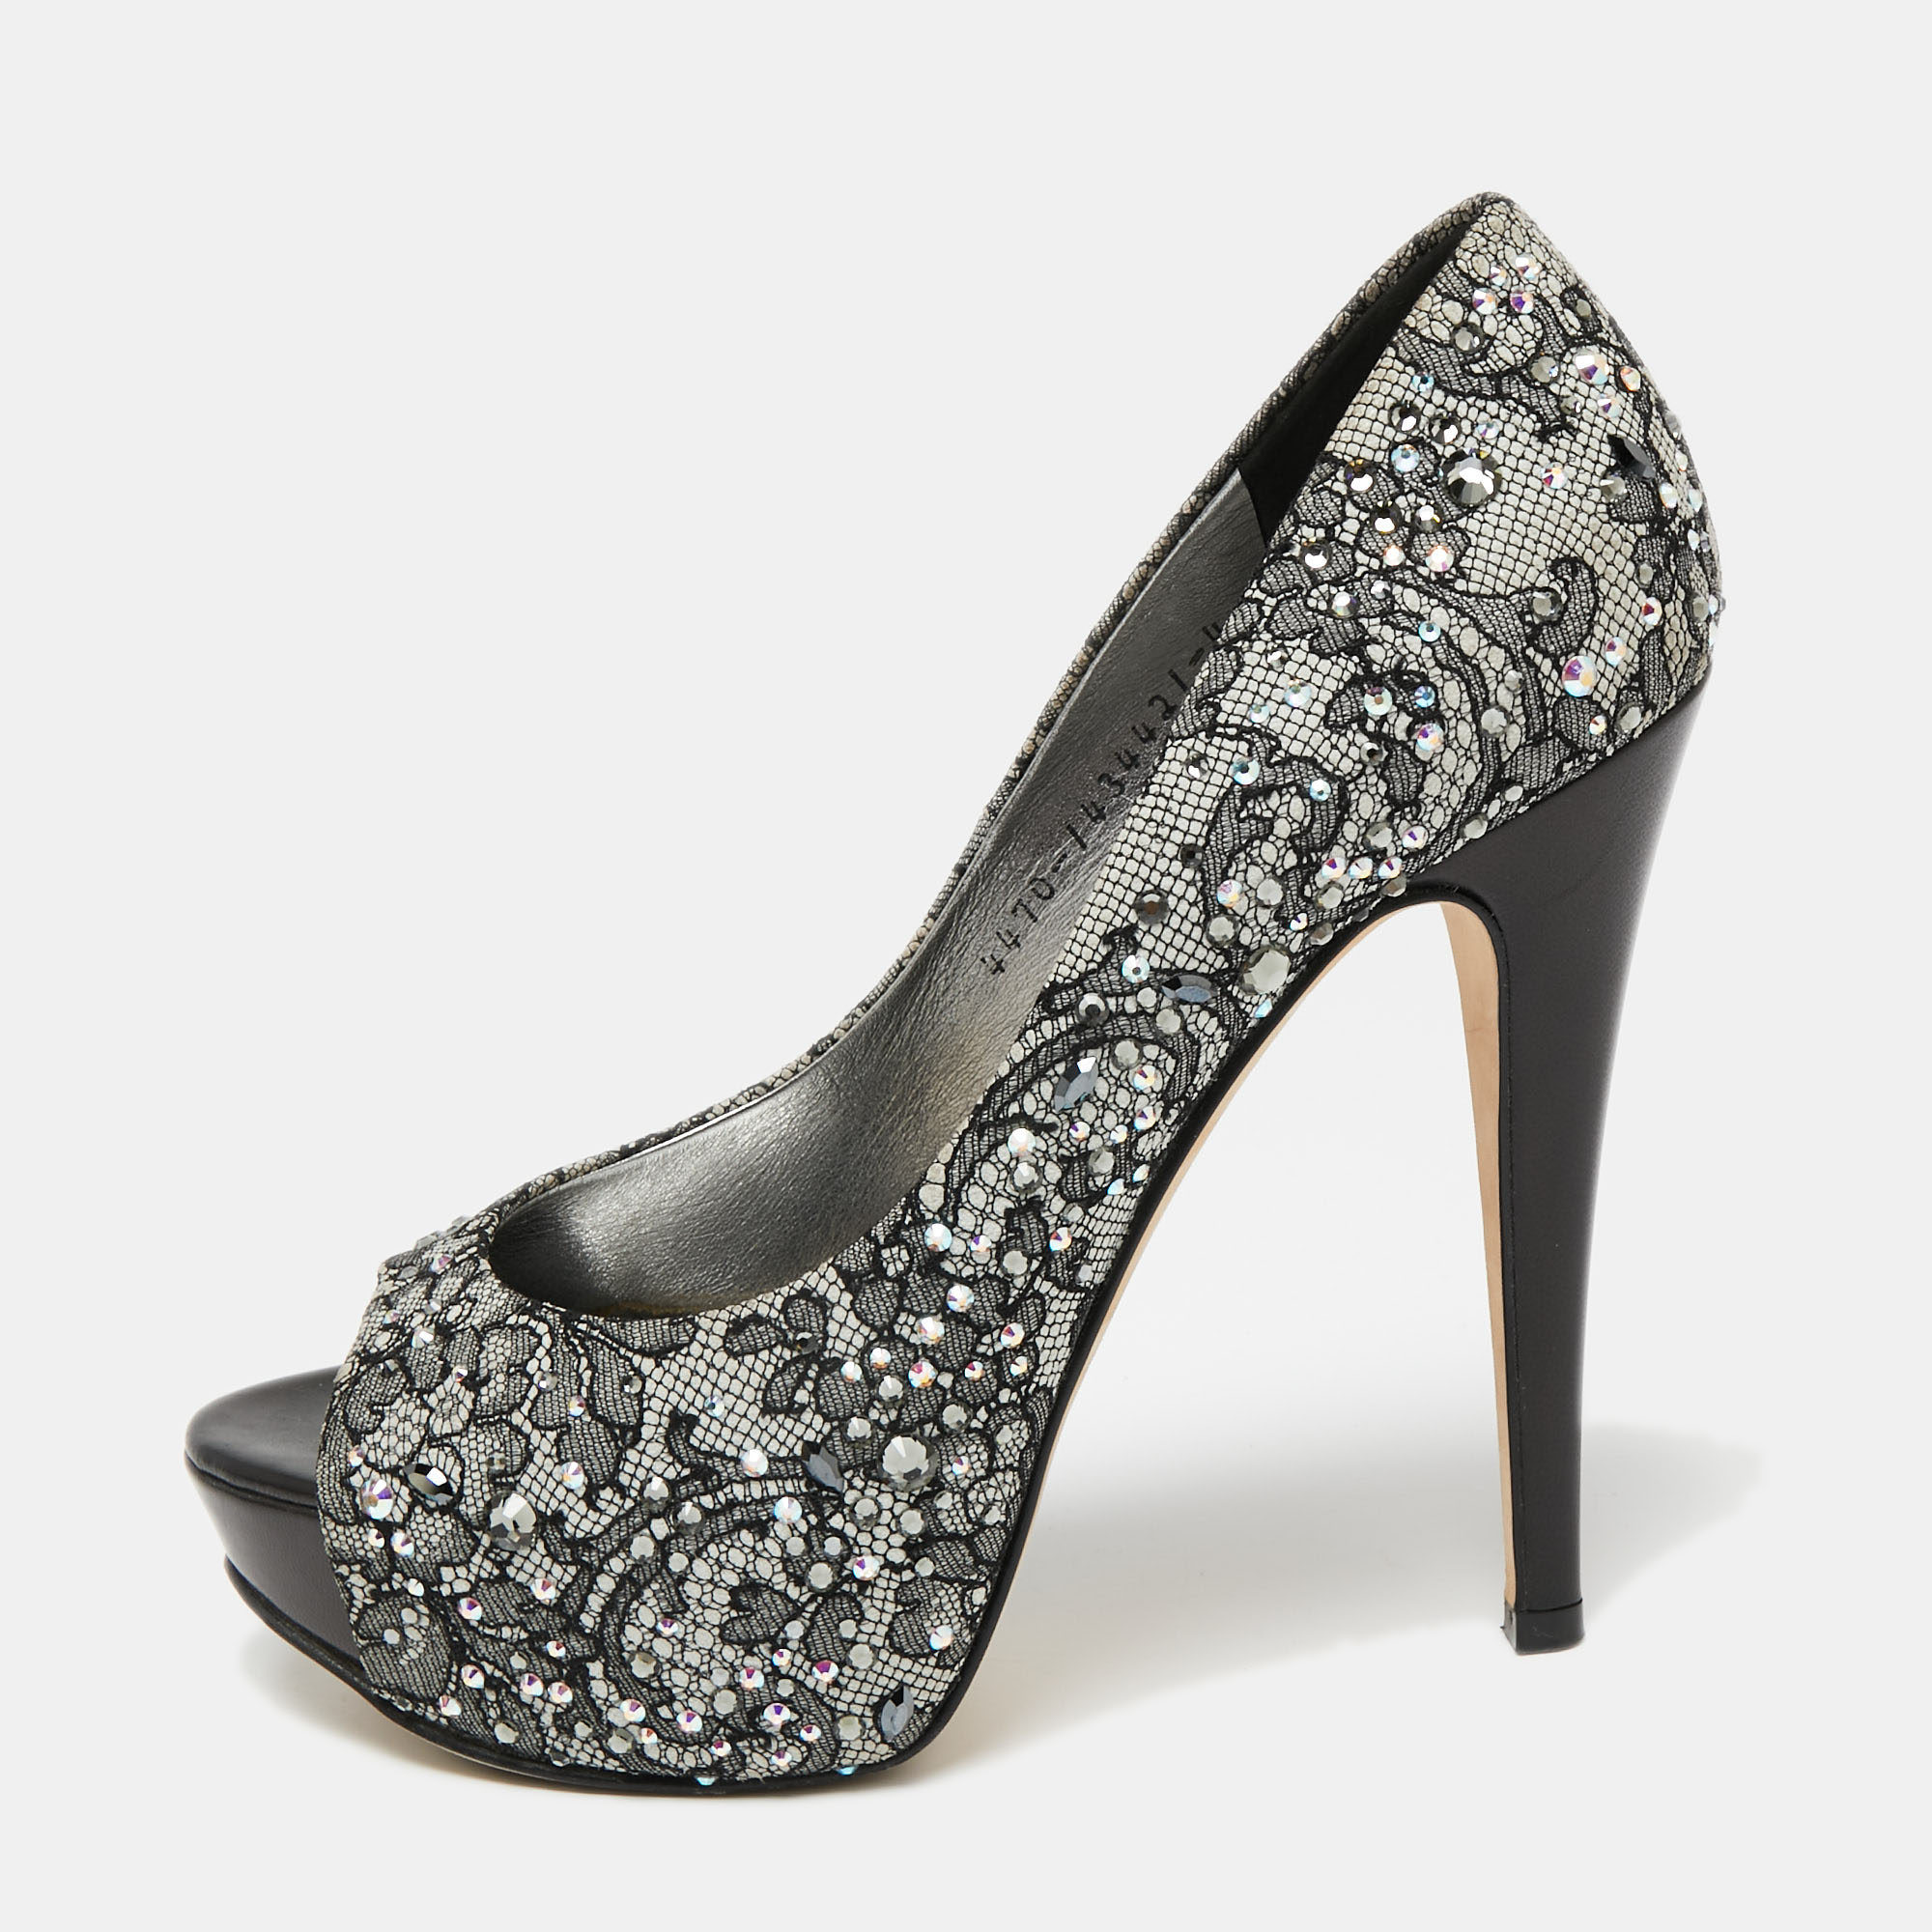 Take every step with elegance and style in these pumps from the House of Gina. They are crafted meticulously using grey black lace which is highlighted with crystal embellishments. They showcase platforms peep toes and tall heels. These pumps will be your favorite pair in no time